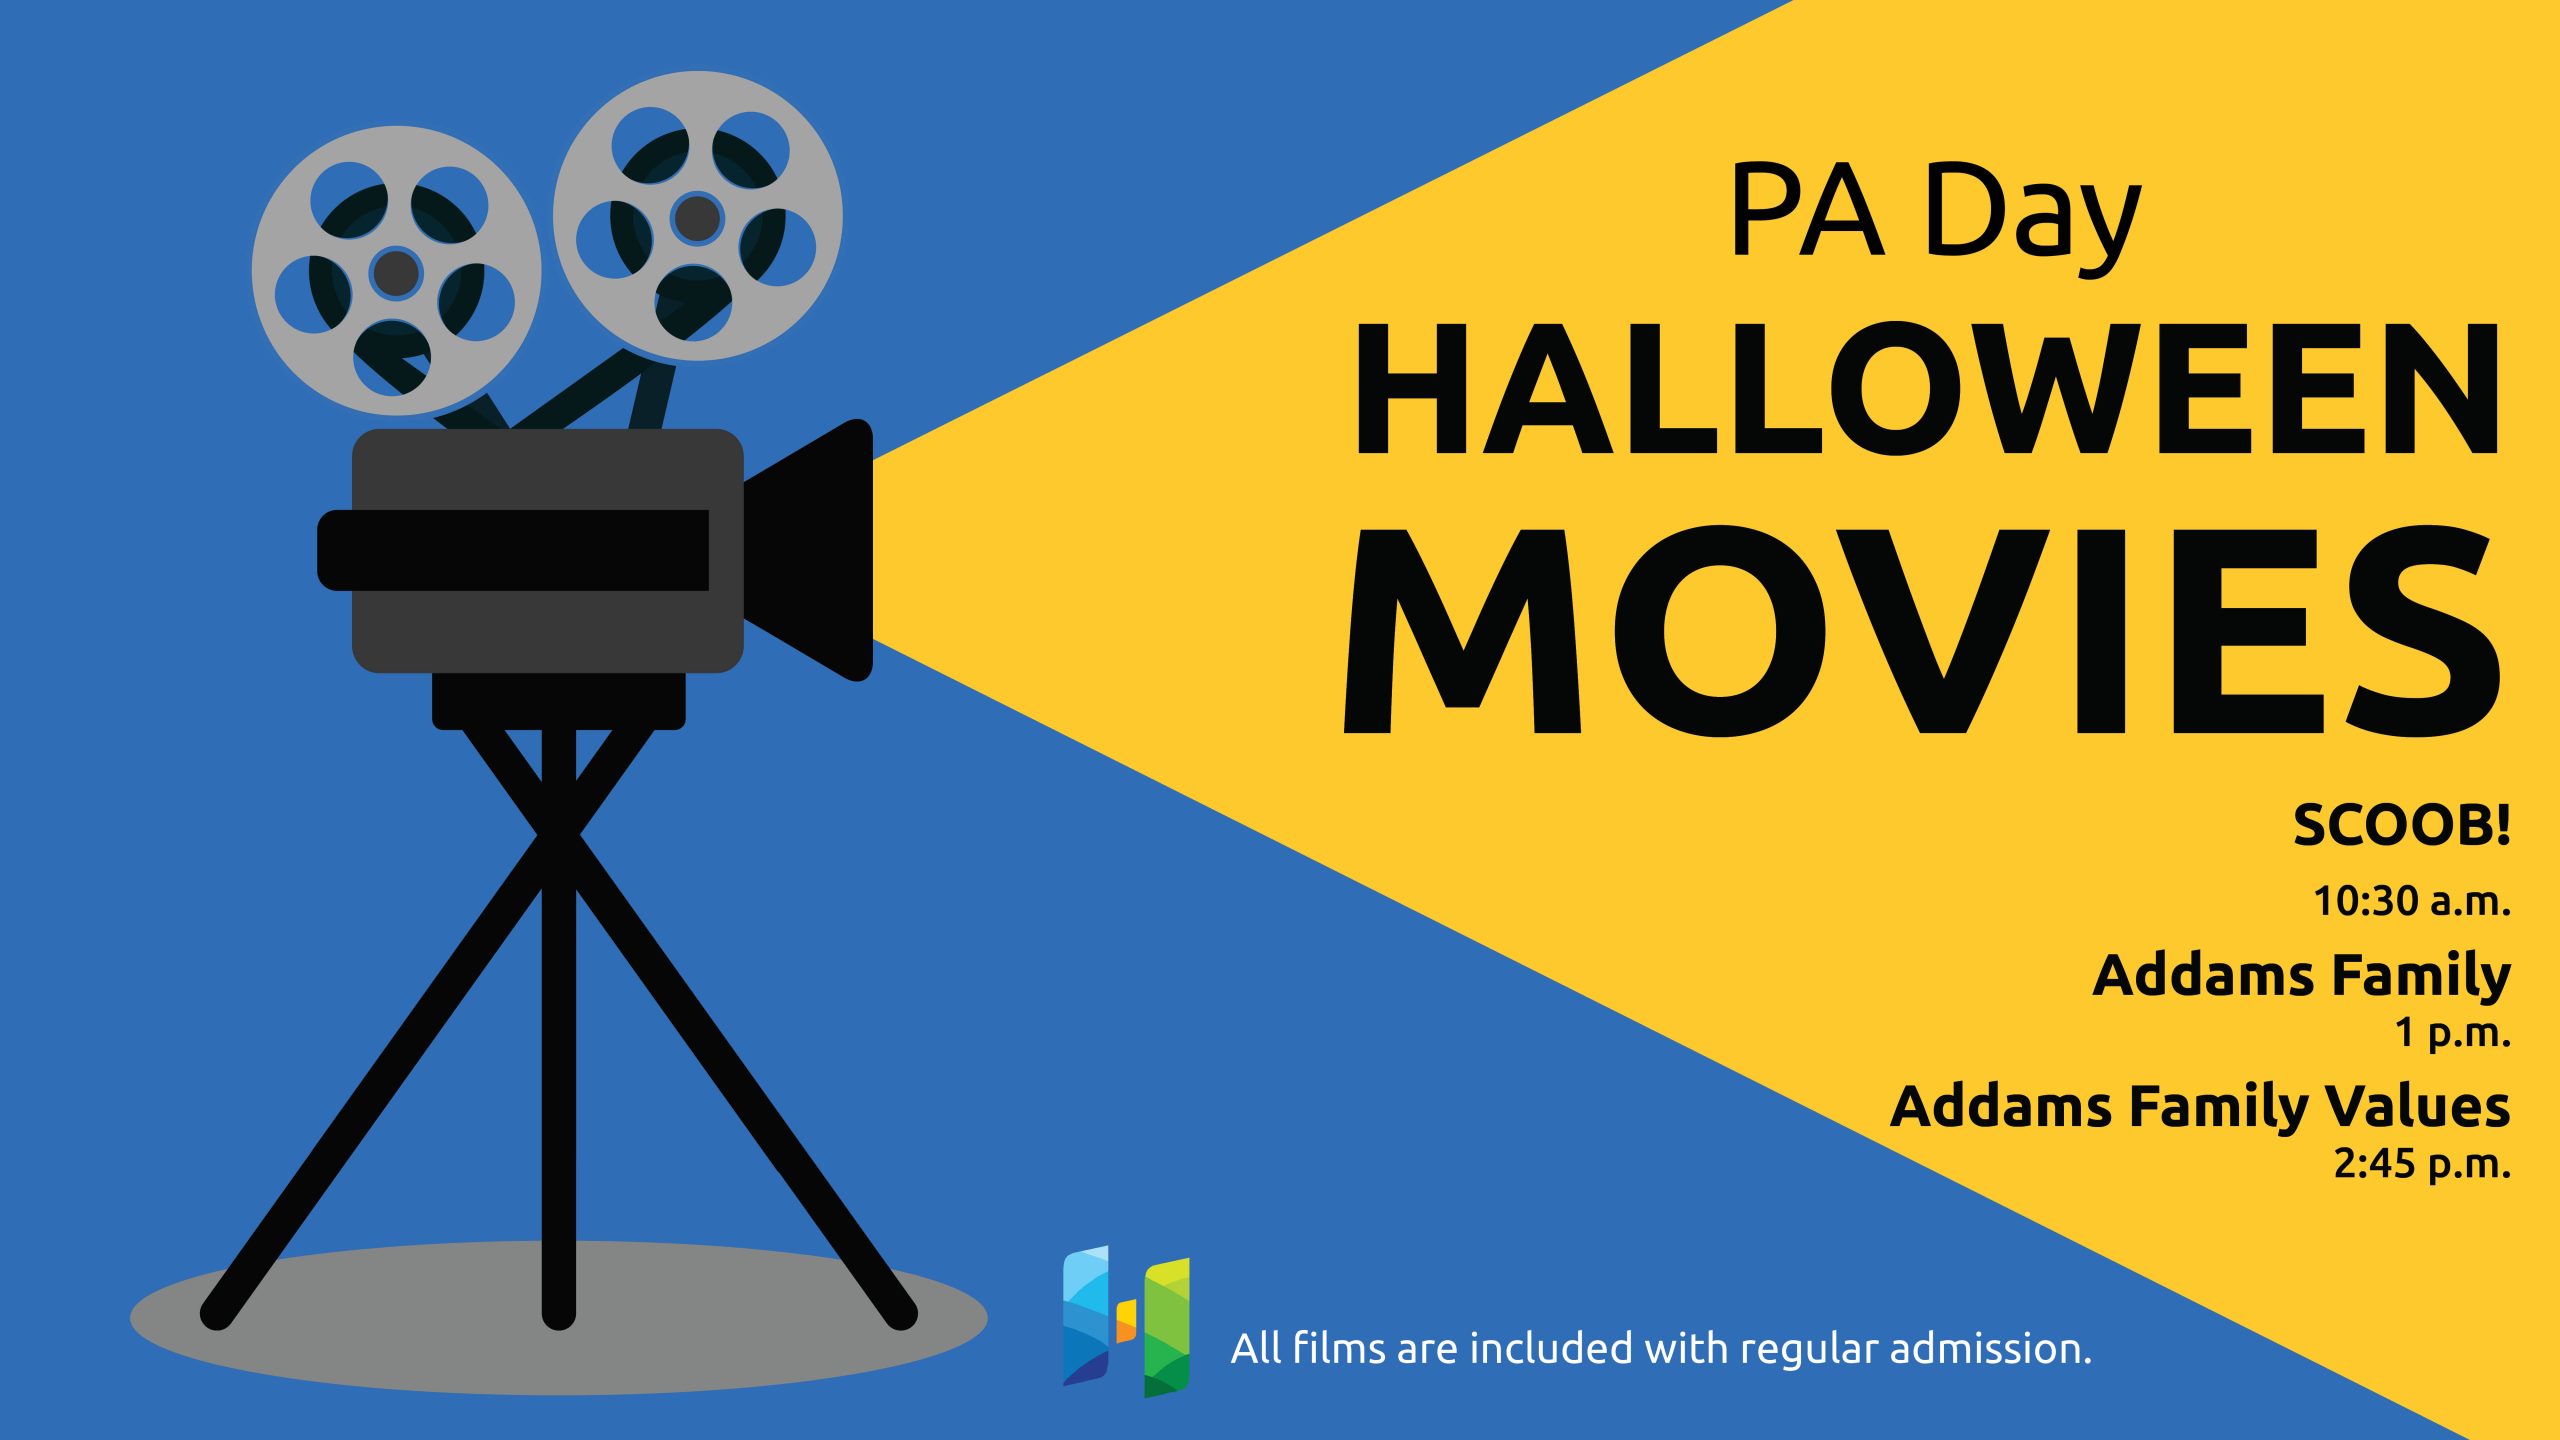 Illustration of a movie projector with text promoting Halloween movies